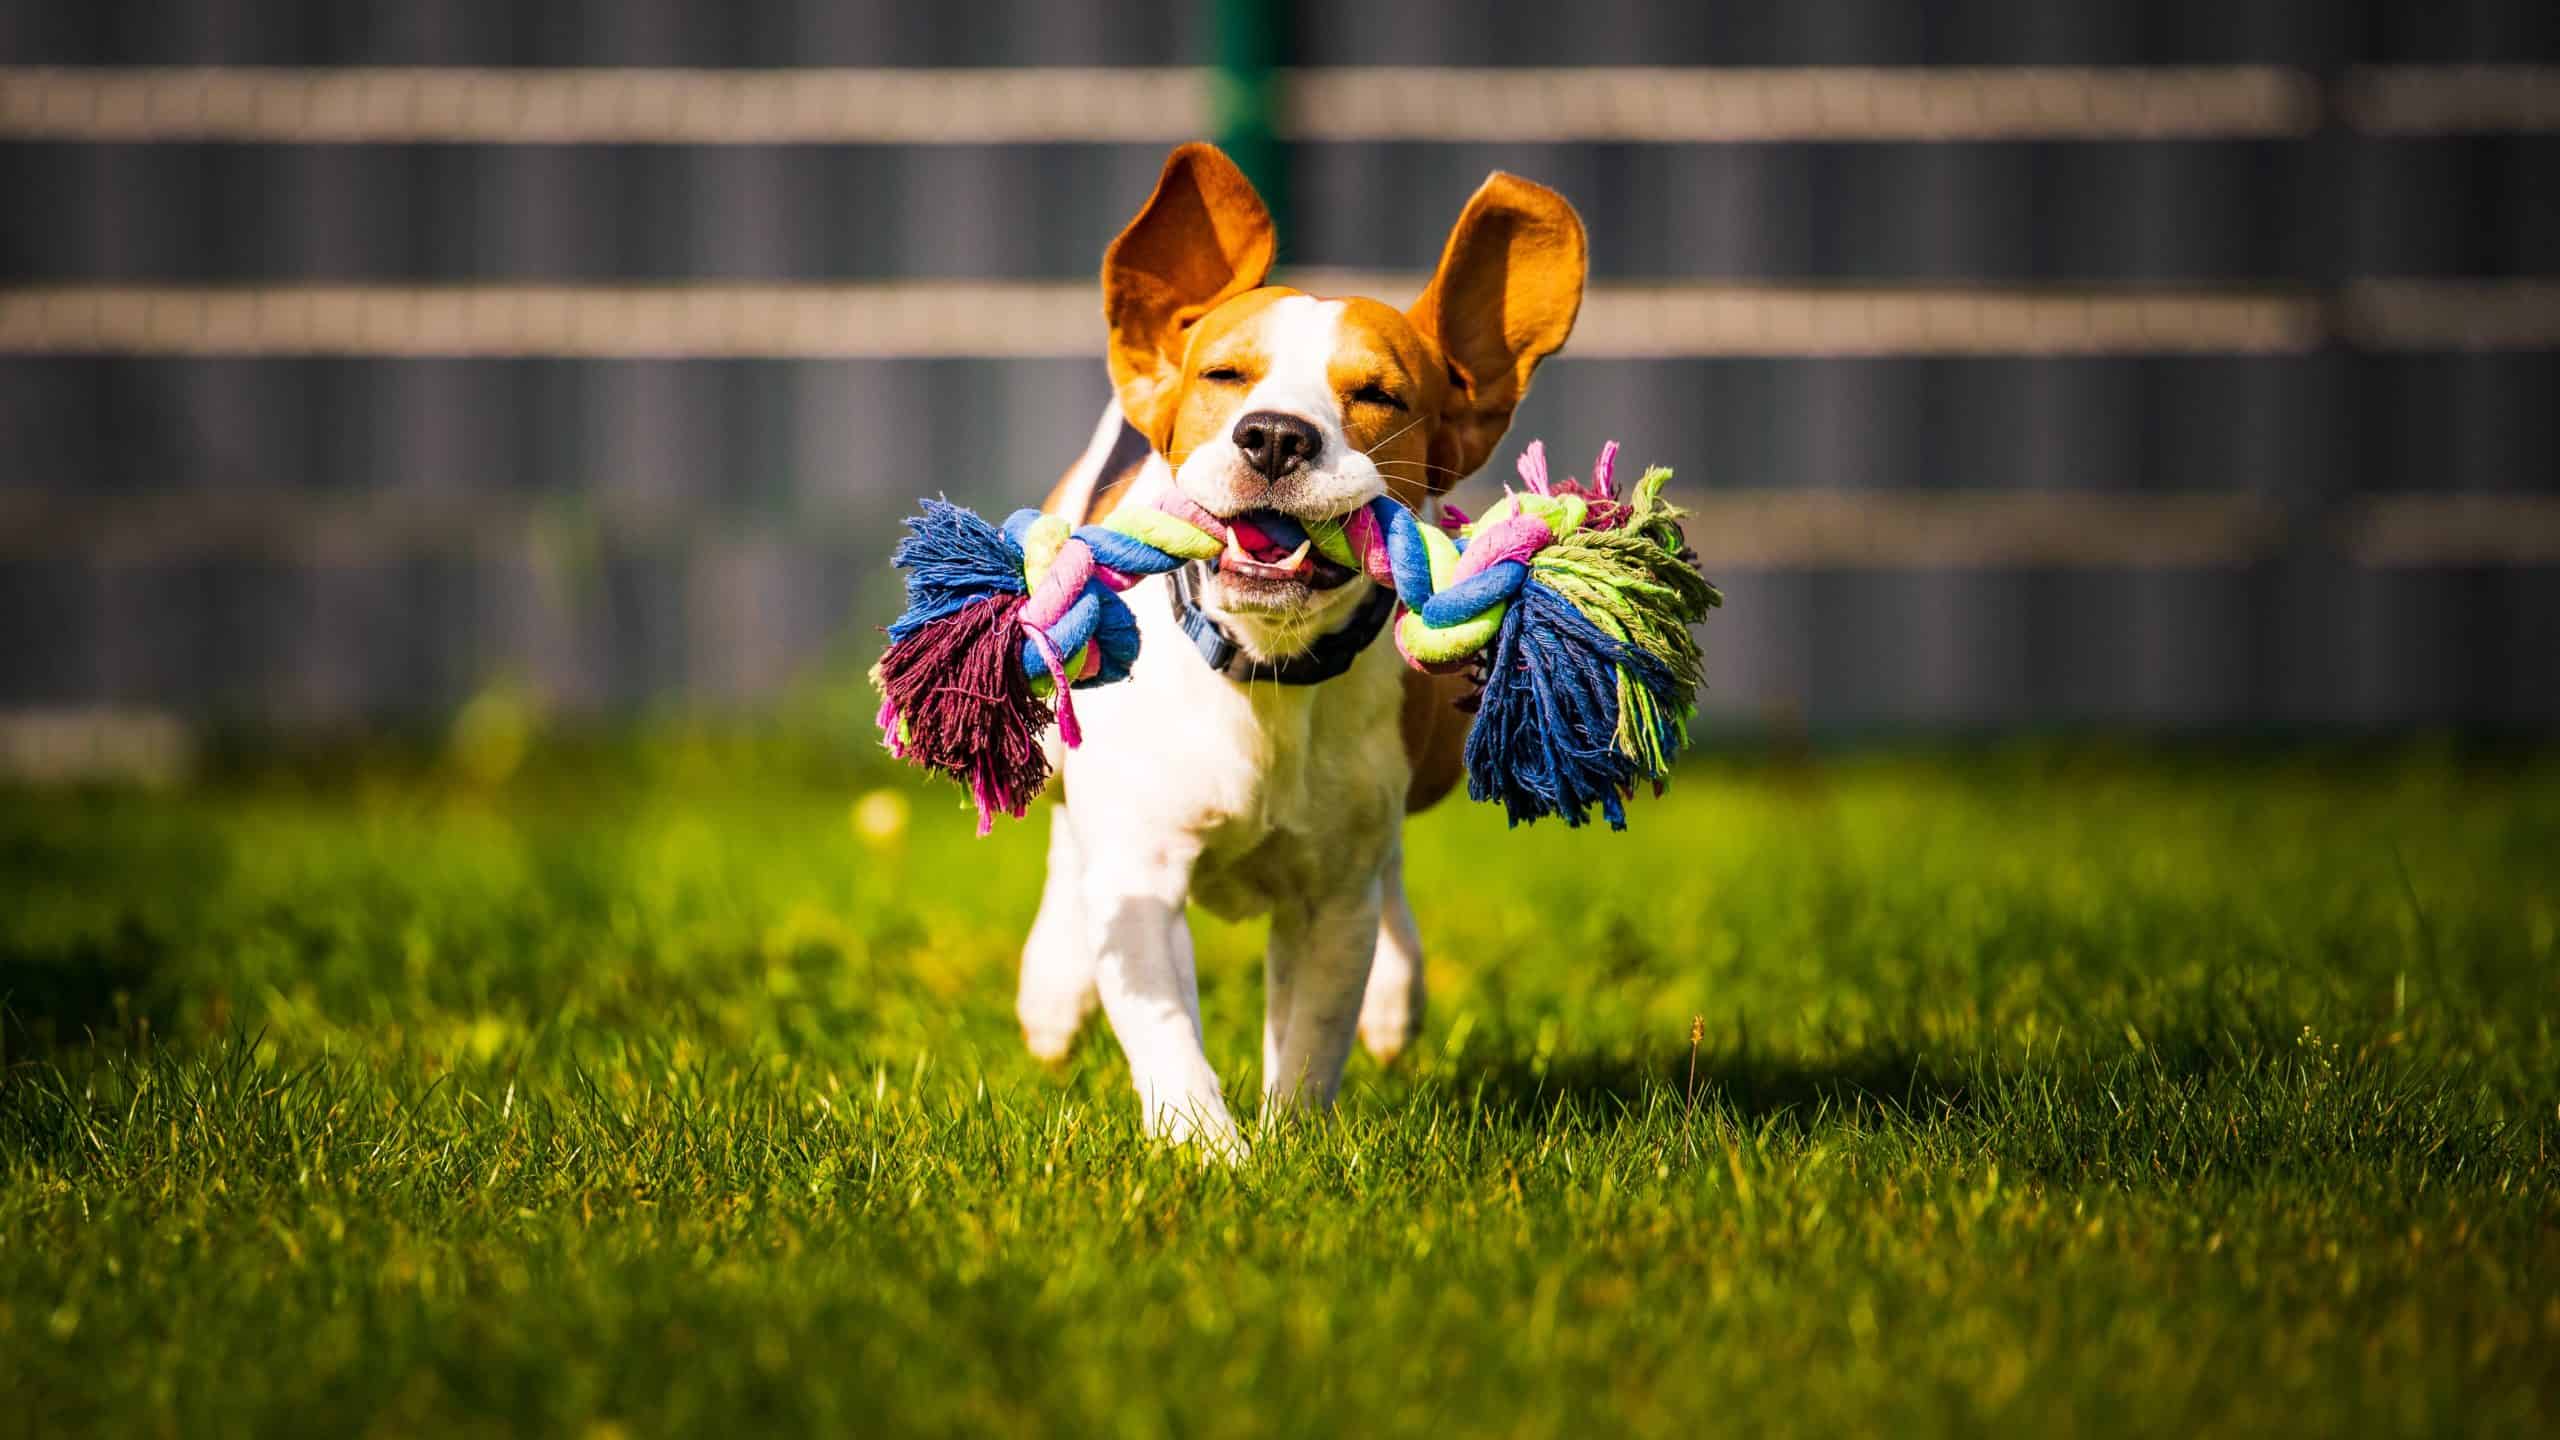 Beagle plays in yard. The costs of installing synthetic turf depends on the area you want to cover, materials, labor, and operation fees.